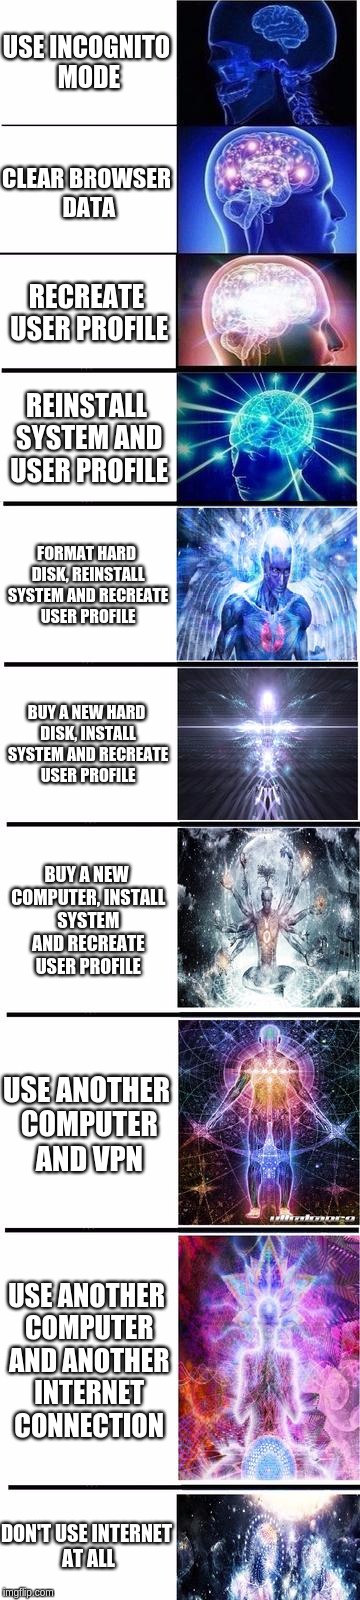 expanding brain | USE INCOGNITO MODE; CLEAR BROWSER DATA; RECREATE USER PROFILE; REINSTALL SYSTEM AND USER PROFILE; FORMAT HARD DISK, REINSTALL SYSTEM AND RECREATE USER PROFILE; BUY A NEW HARD DISK, INSTALL SYSTEM AND RECREATE USER PROFILE; BUY A NEW COMPUTER, INSTALL SYSTEM AND RECREATE USER PROFILE; USE ANOTHER COMPUTER AND VPN; USE ANOTHER COMPUTER AND ANOTHER INTERNET CONNECTION; DON'T USE INTERNET AT ALL | image tagged in expanding brain | made w/ Imgflip meme maker